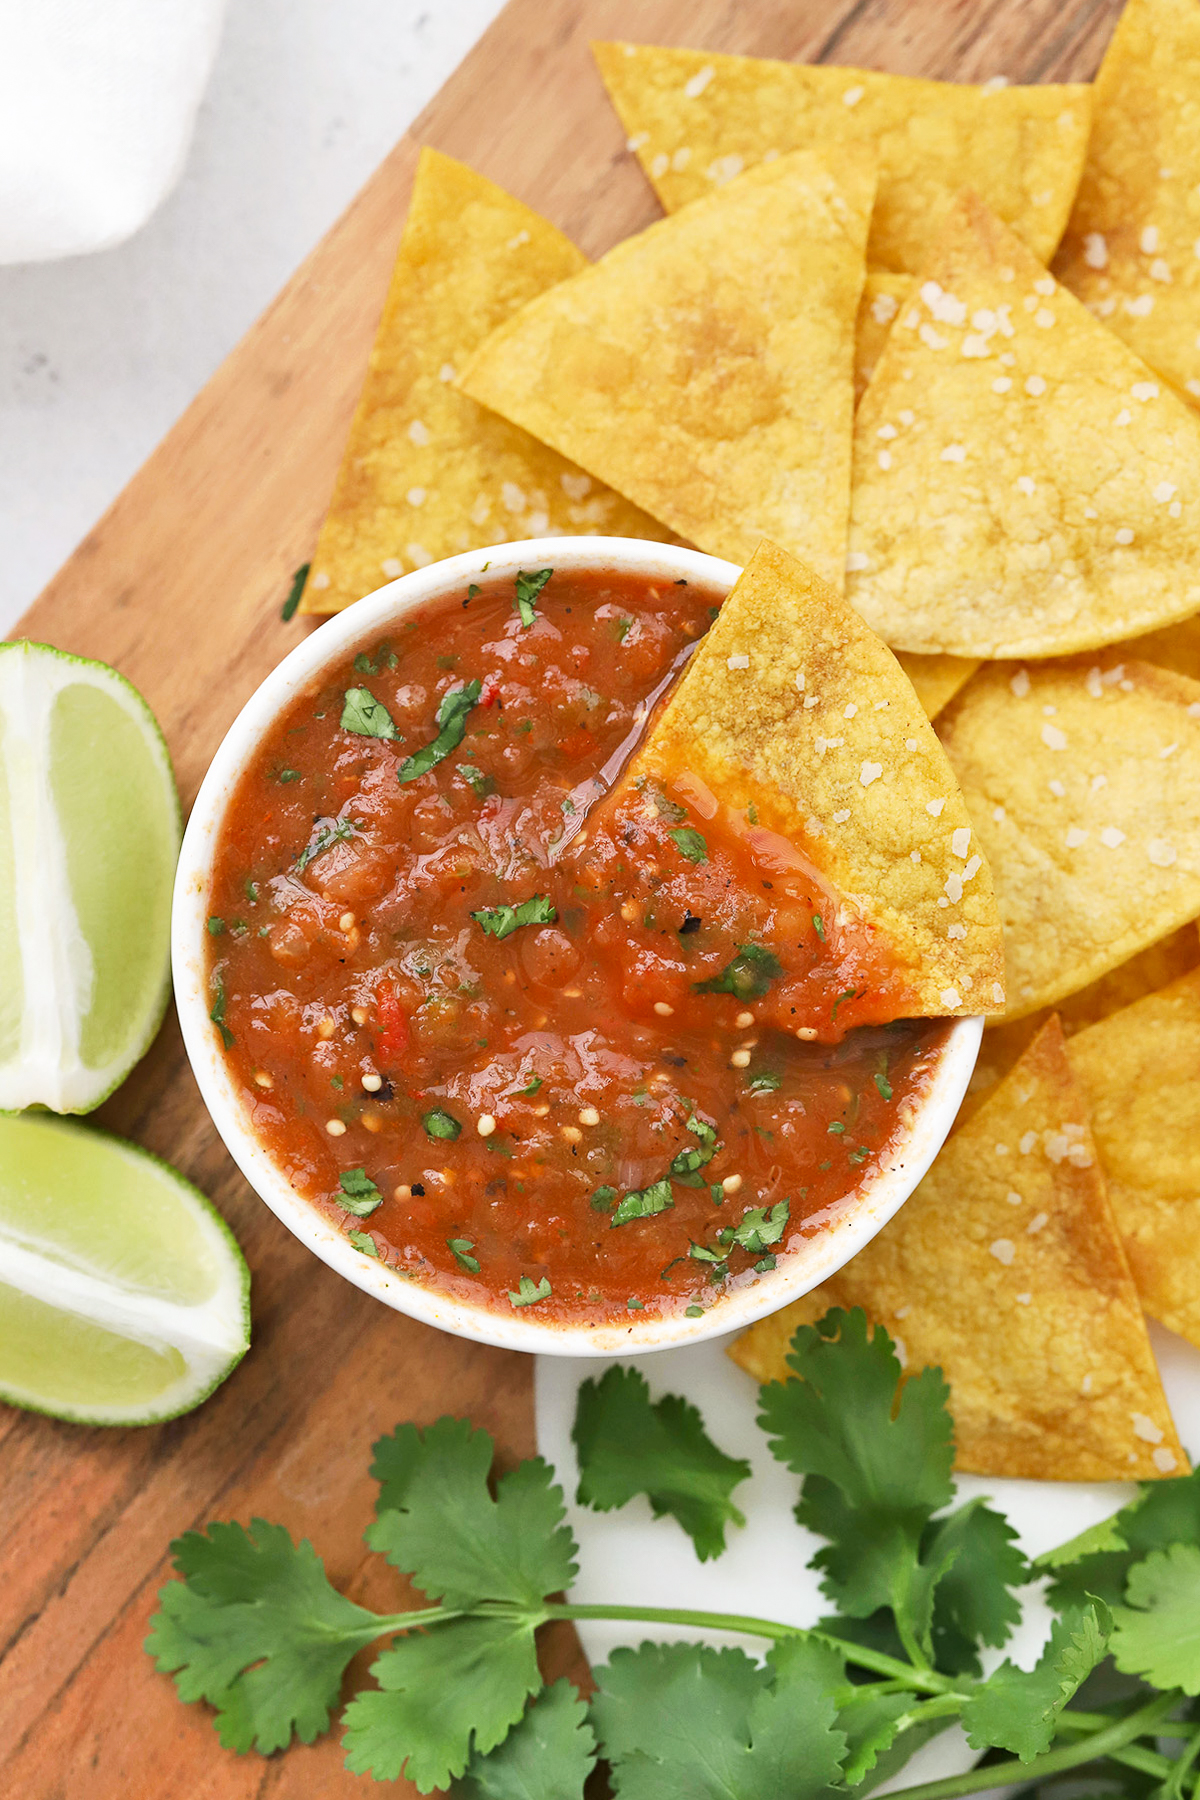 Overhead view of a bowl of chipotle salsa on a wooden board with tortilla chips